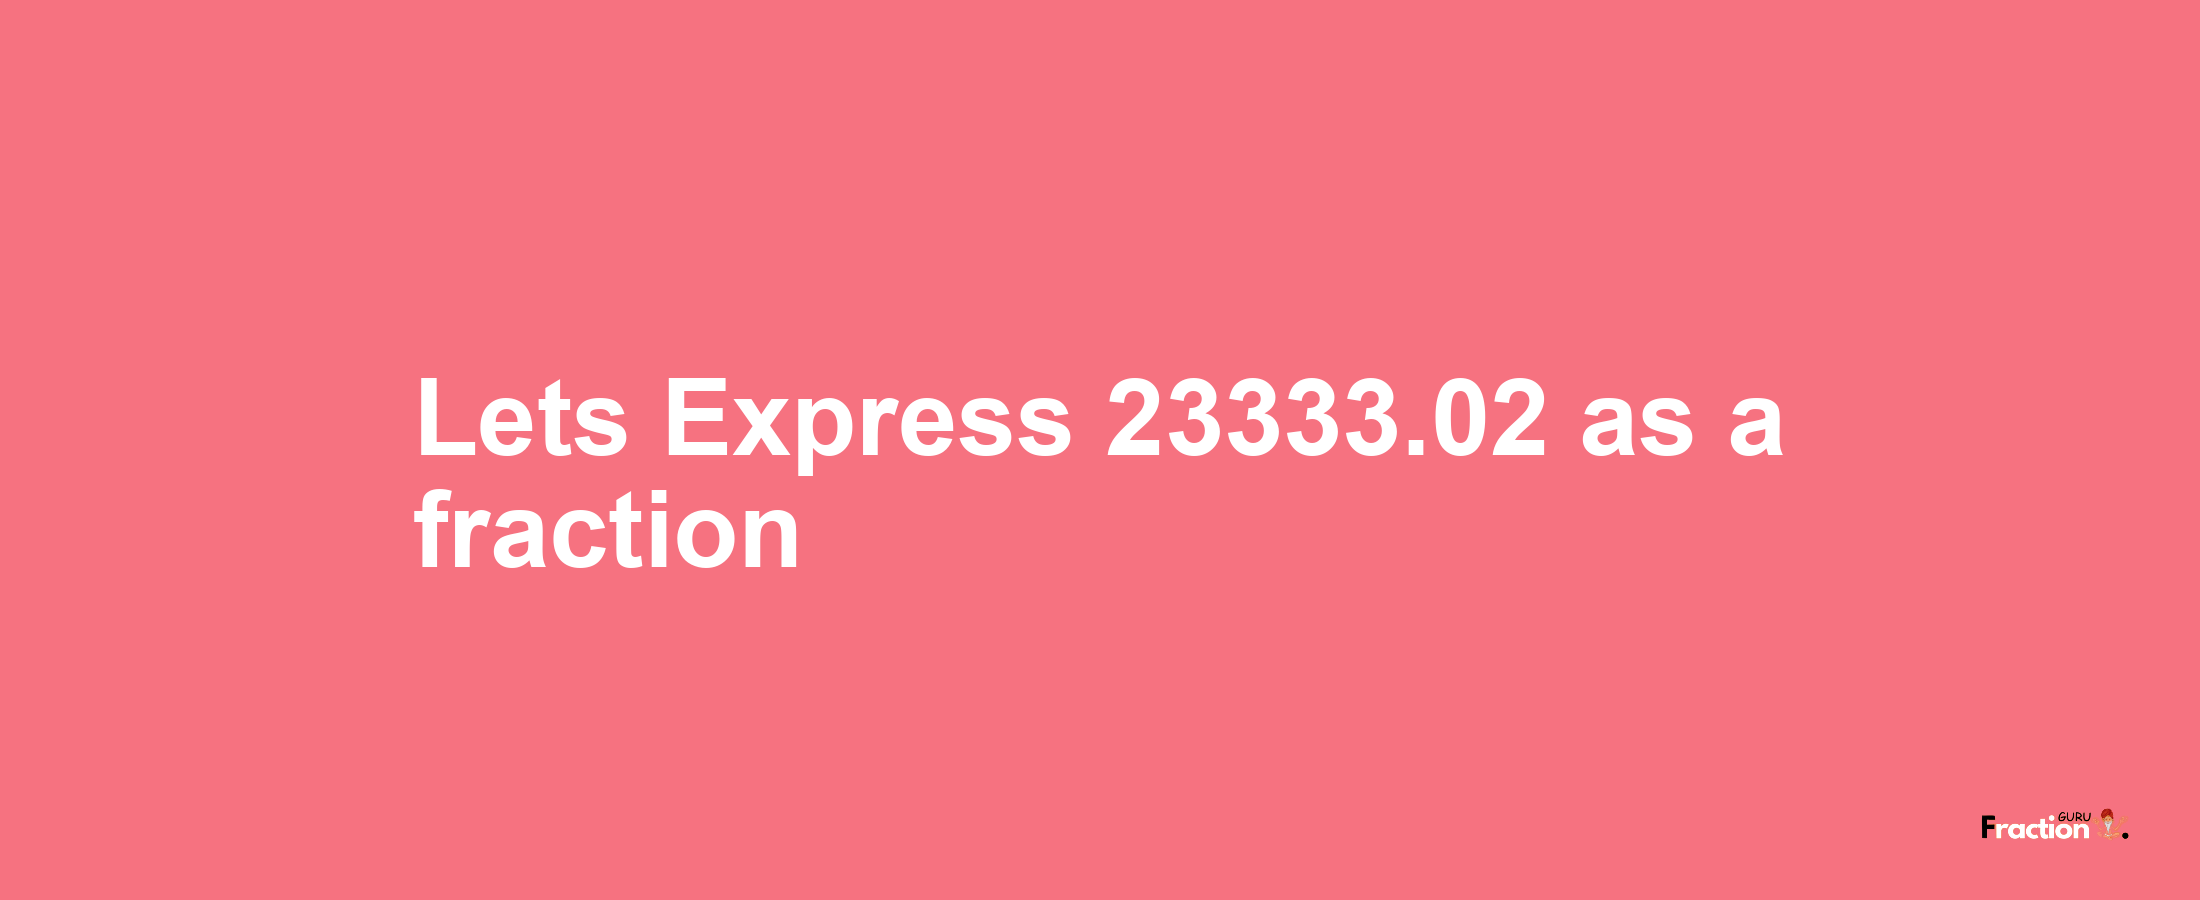 Lets Express 23333.02 as afraction